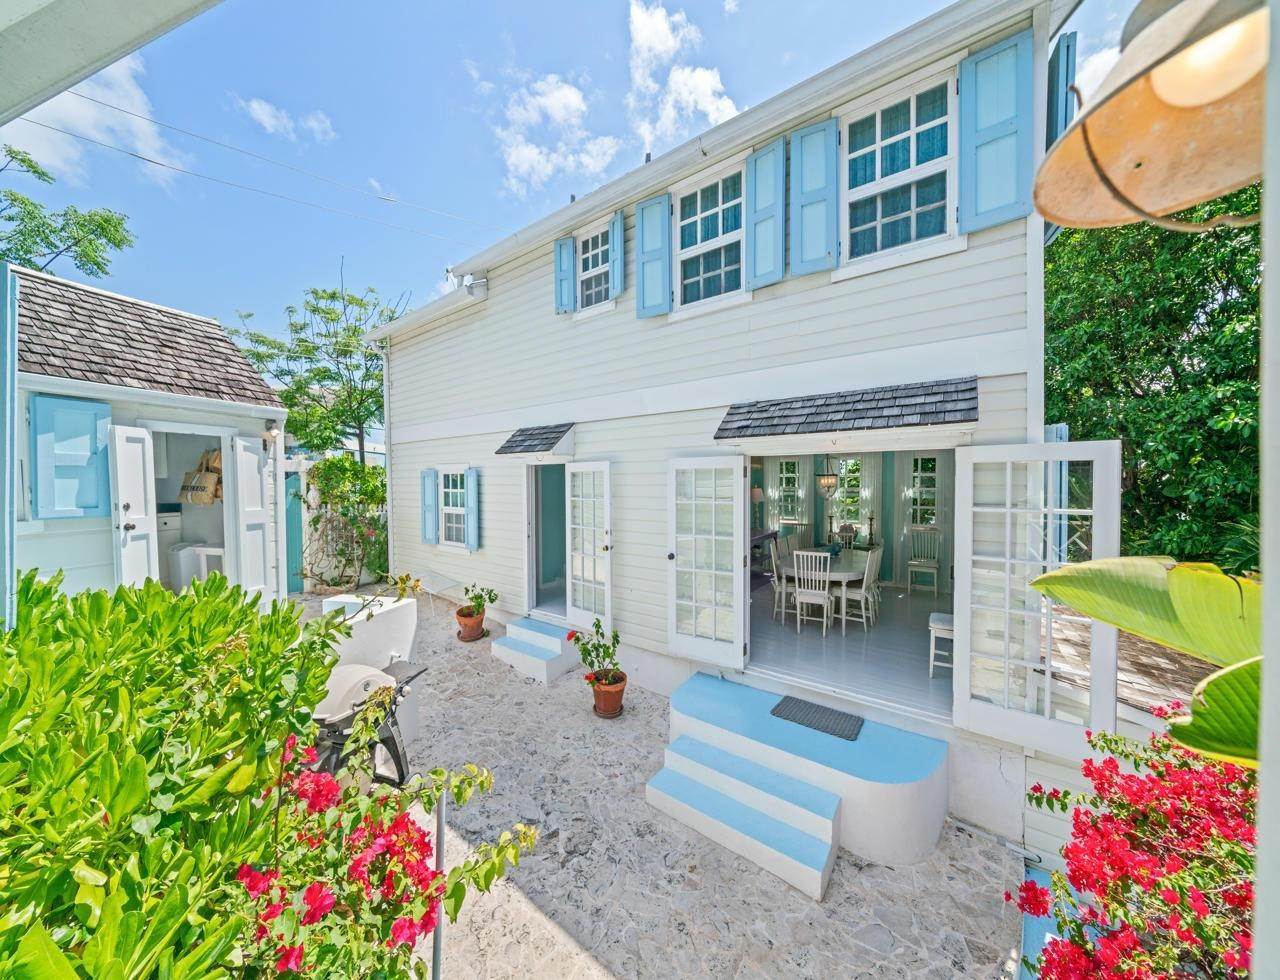 Single Family Homes for Sale at Harbour Island, Eleuthera, Bahamas